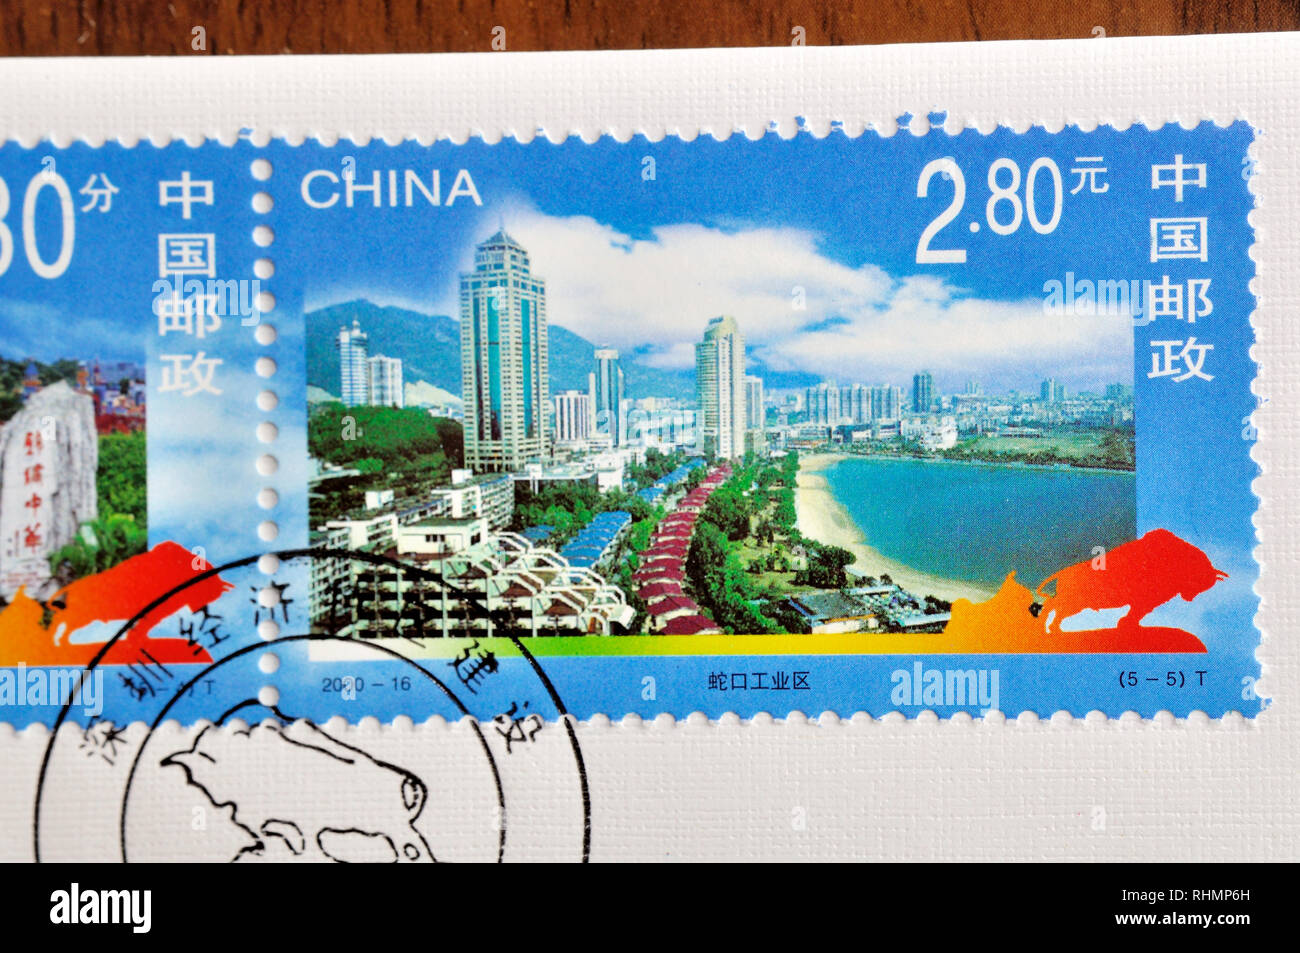 CHINA - CIRCA 2000: A stamp printed in China shows 2000-16 Construction of the Shenzhen Special Economic Zone, circa 2000., circa 2000 Stock Photo